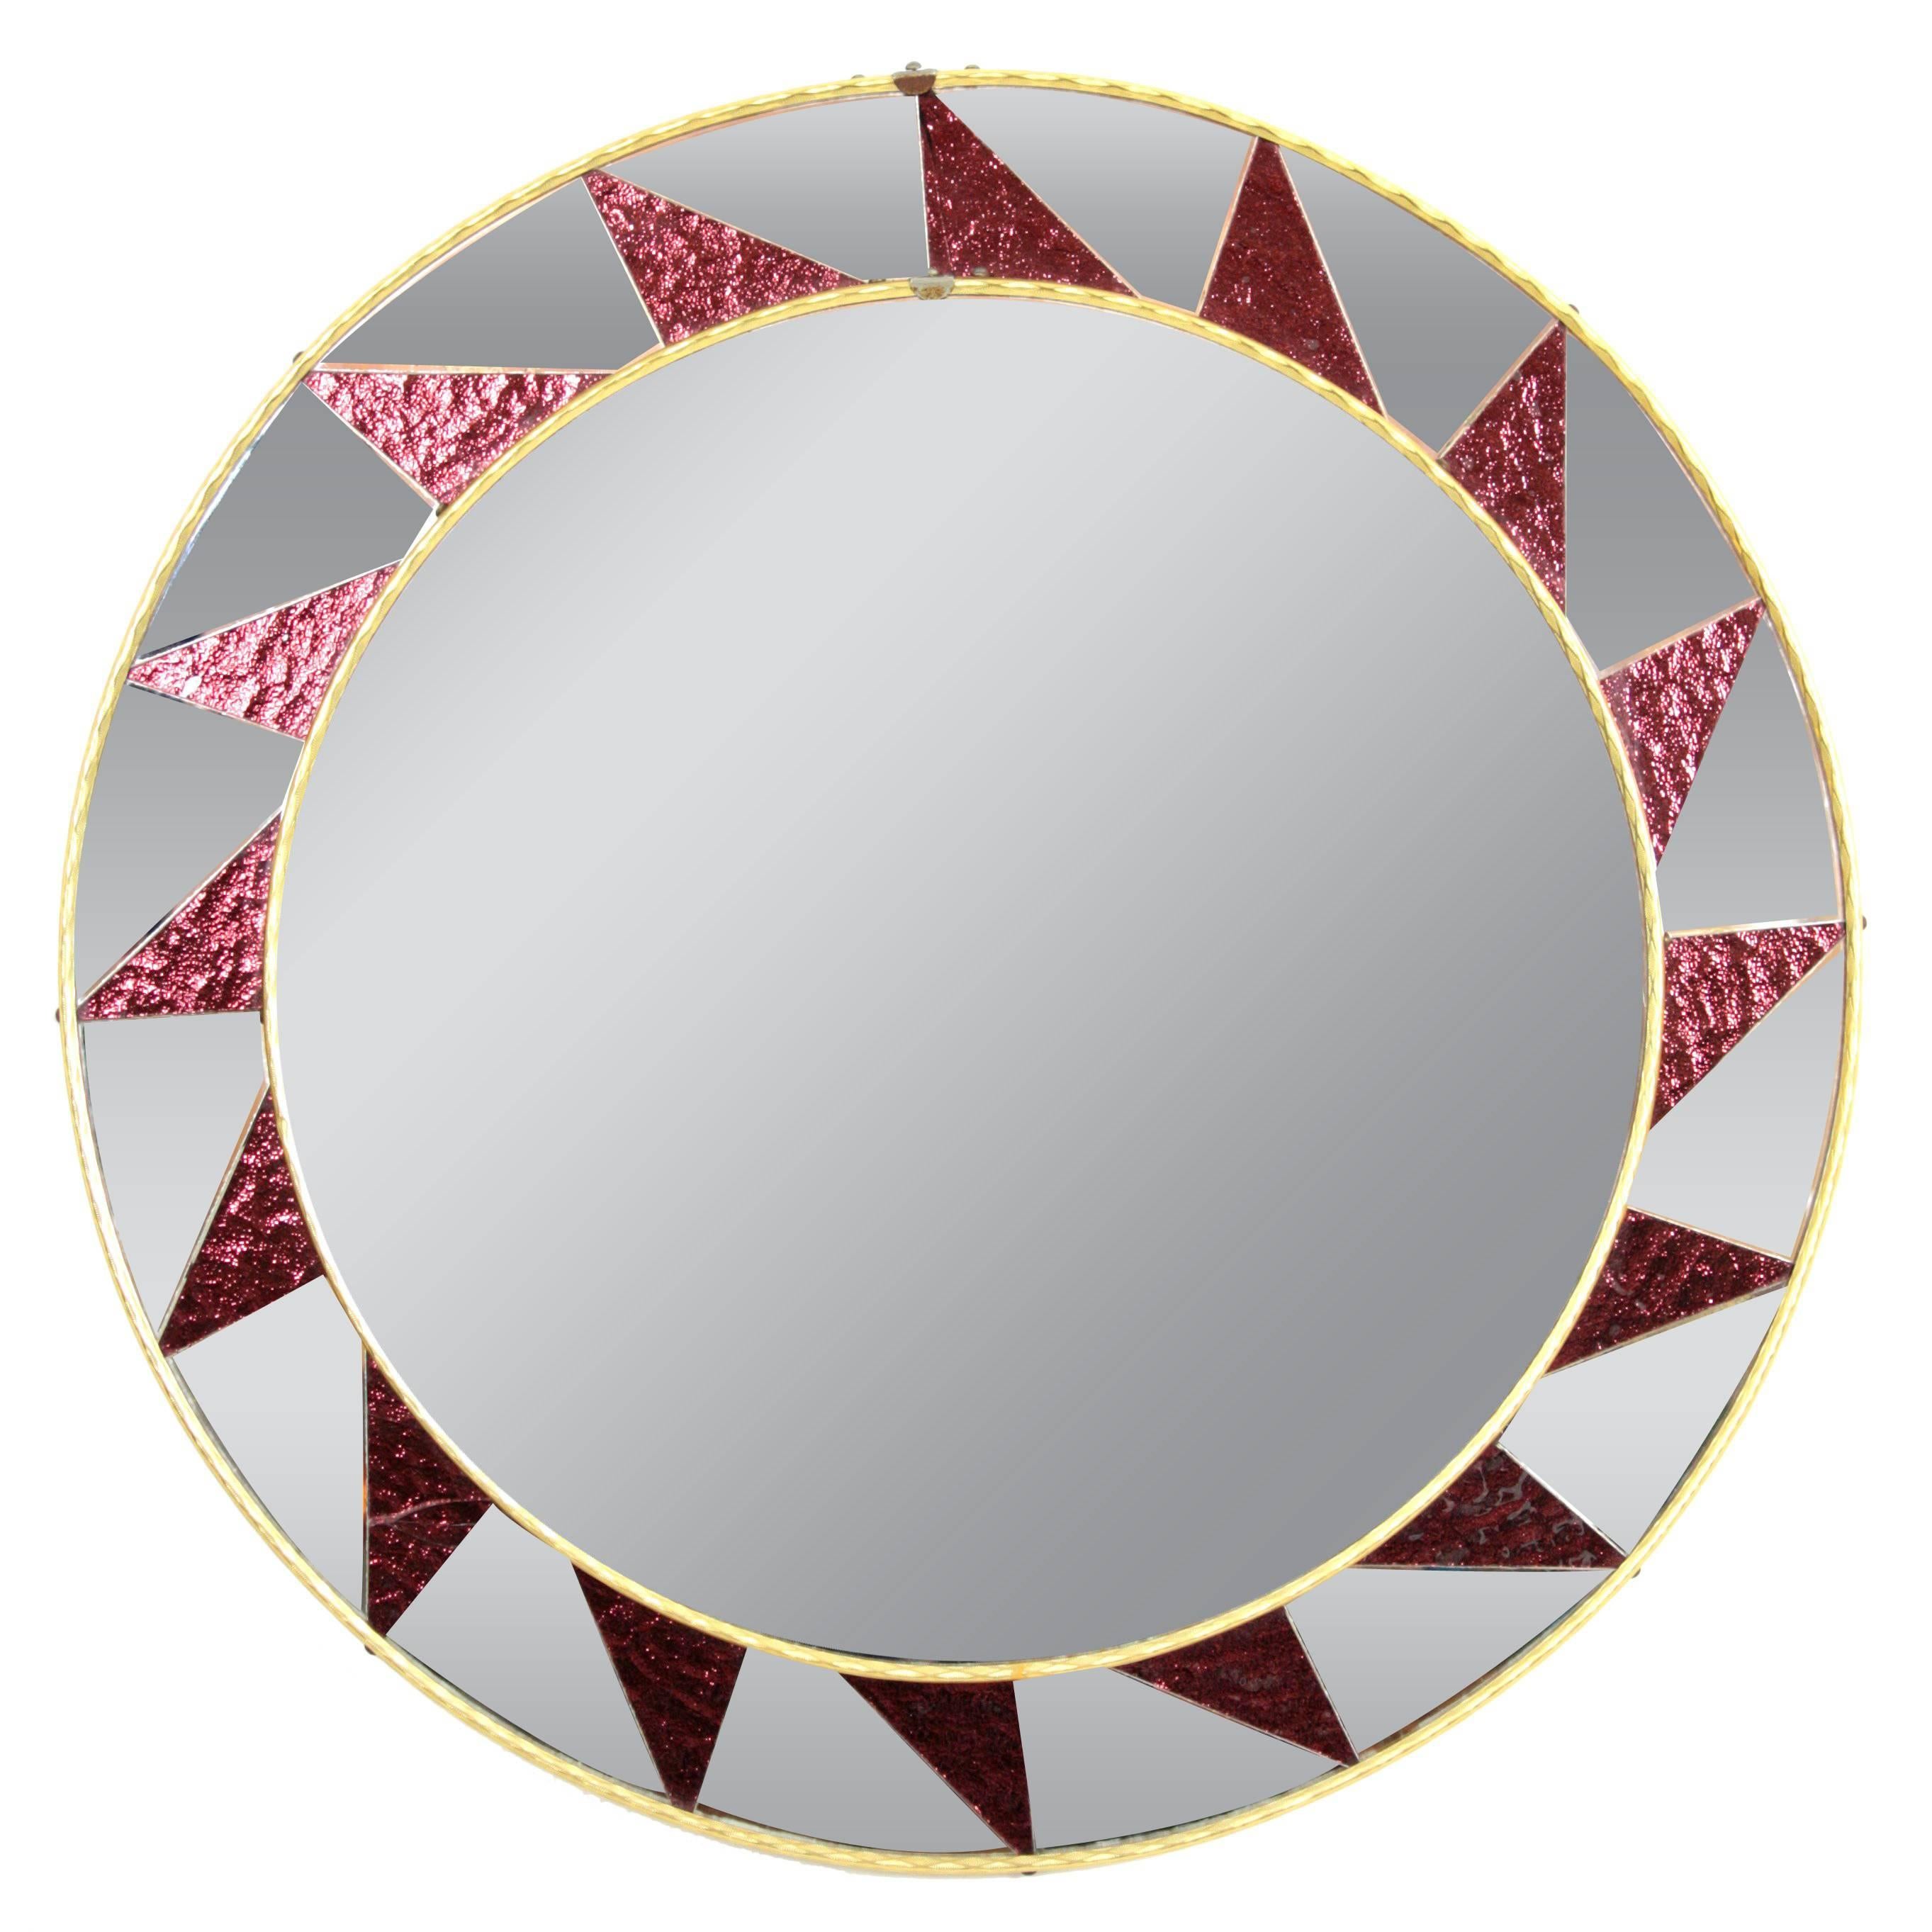 1960s Mosaic Circular Mirror Framed by a Pattern of Garned Mirrored Glasses